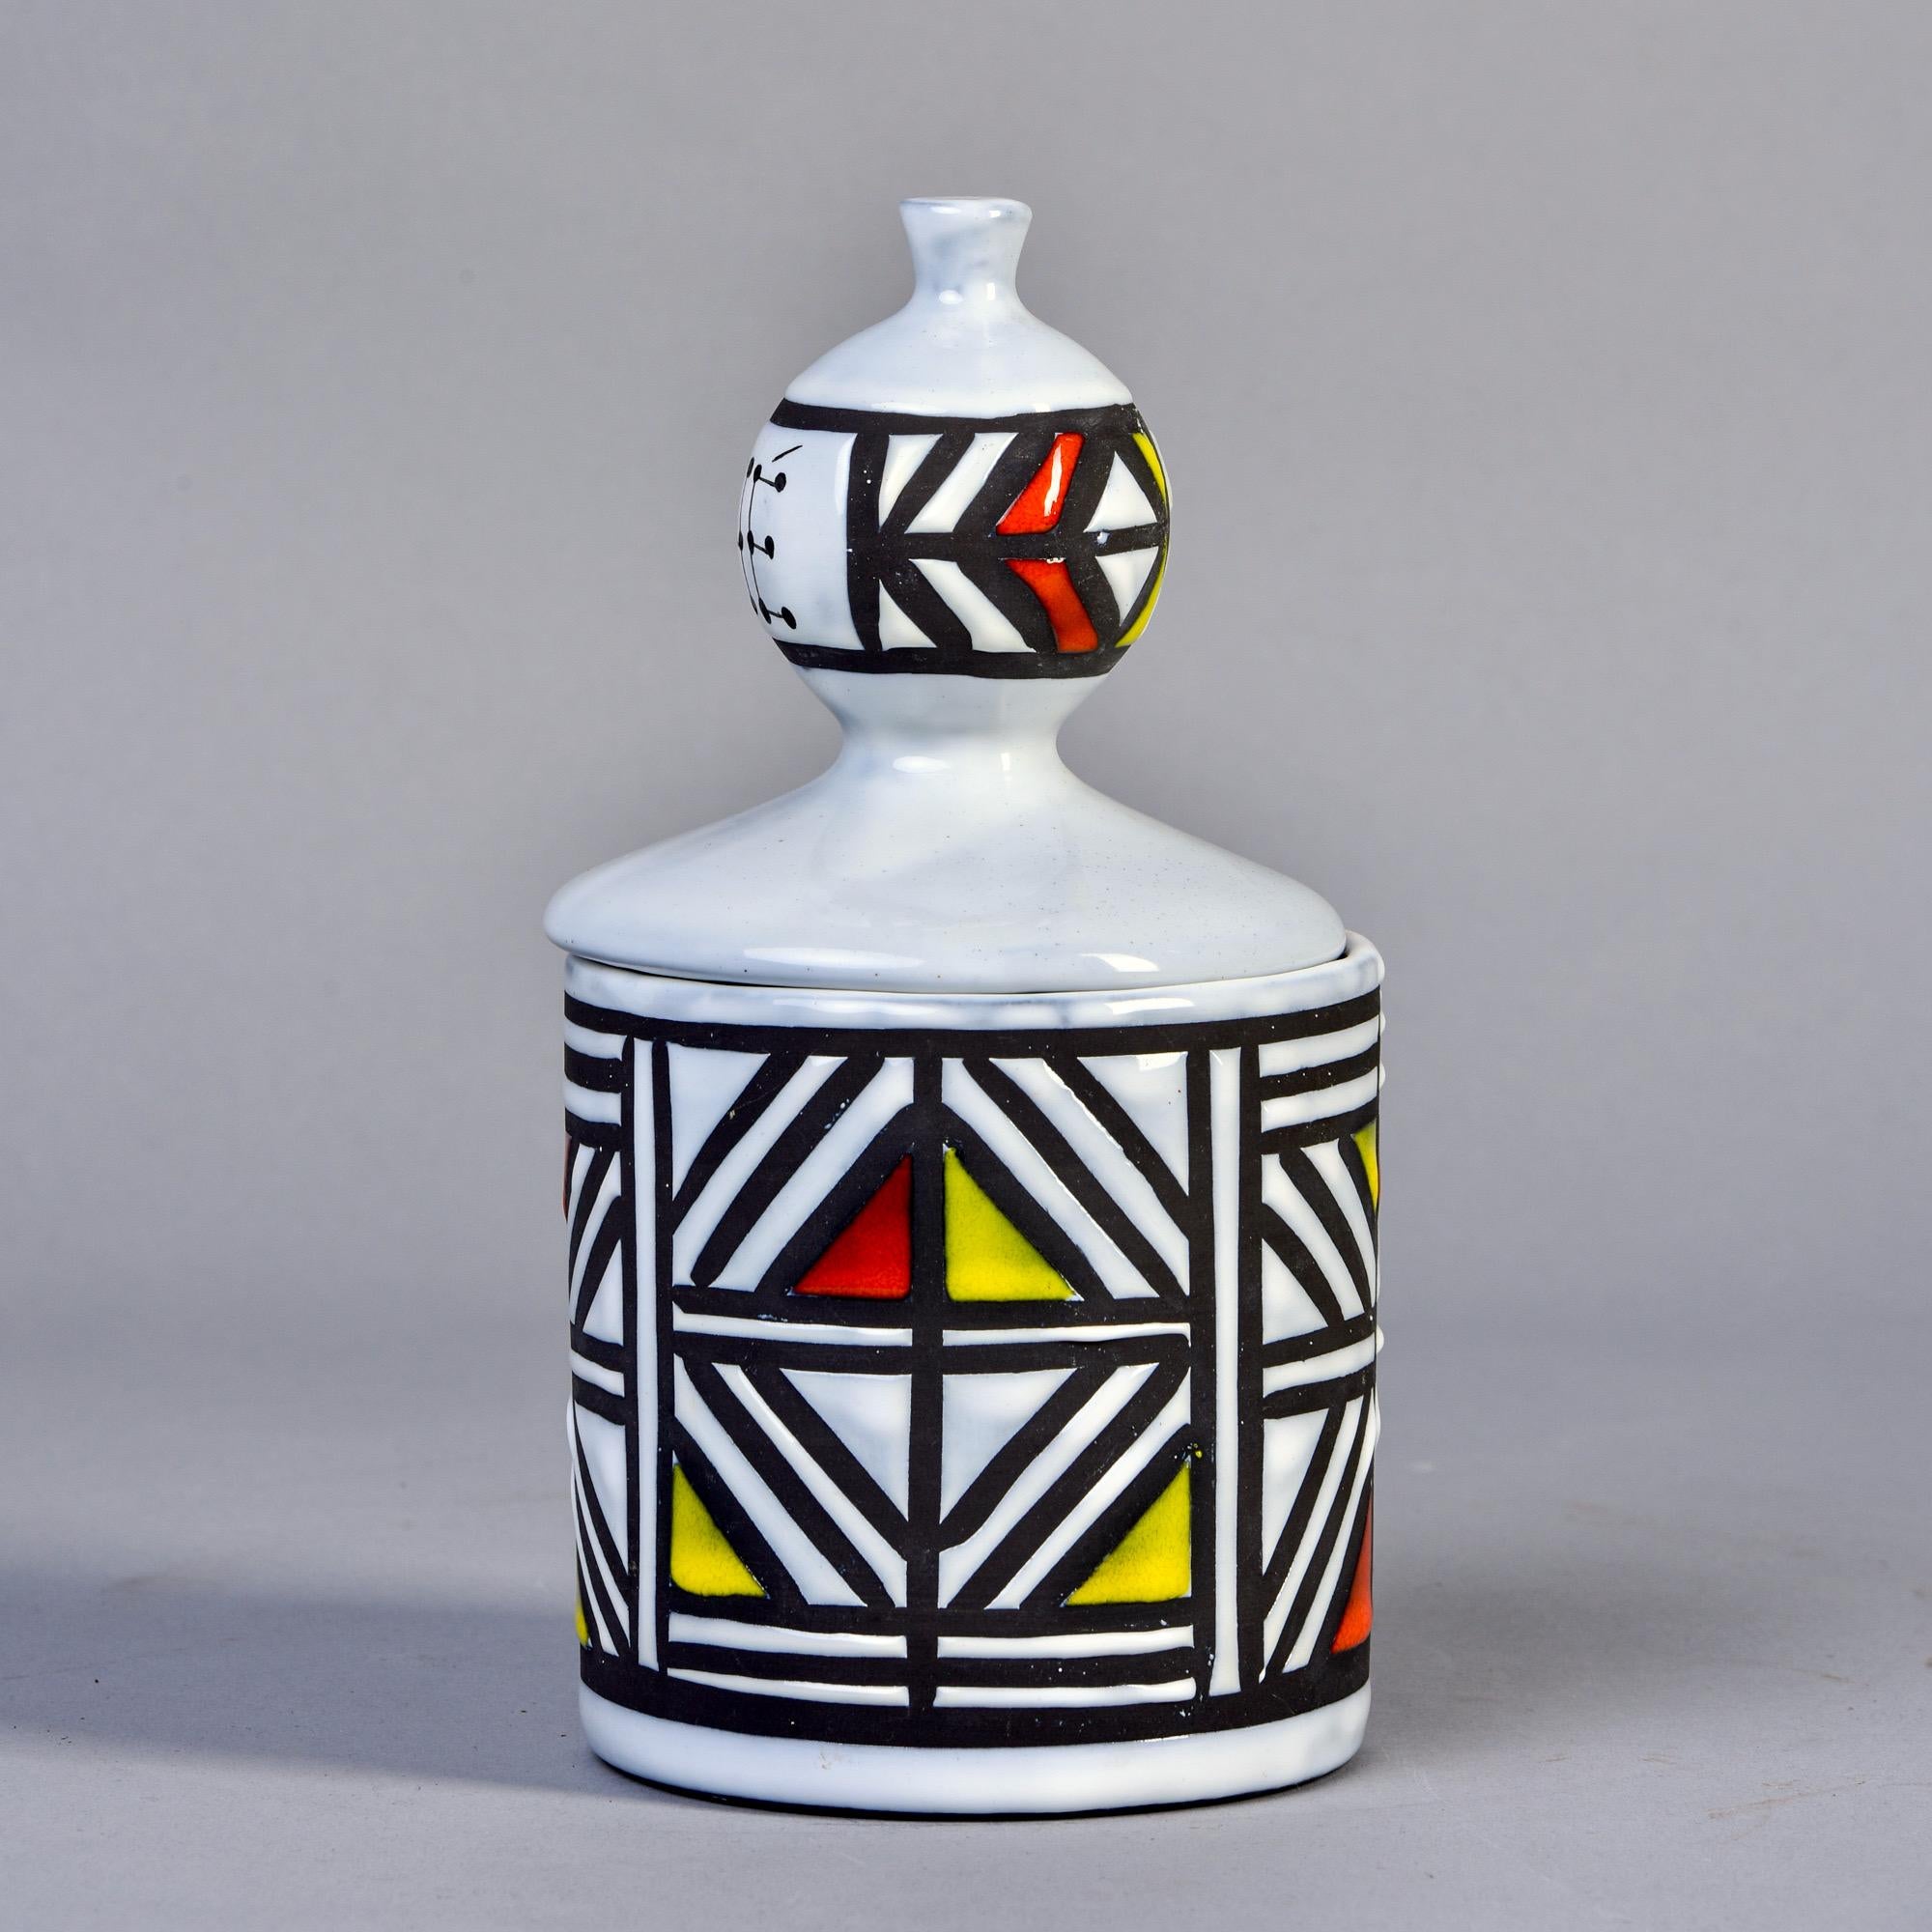 Signed ceramic tea canister by Roger Capron in his iconic black and white plus color block style, circa 1960s. Signed on the underside of base with artist name, Vallauris, France. Numbered M74 on underside of base and lid. 

No flaws found.